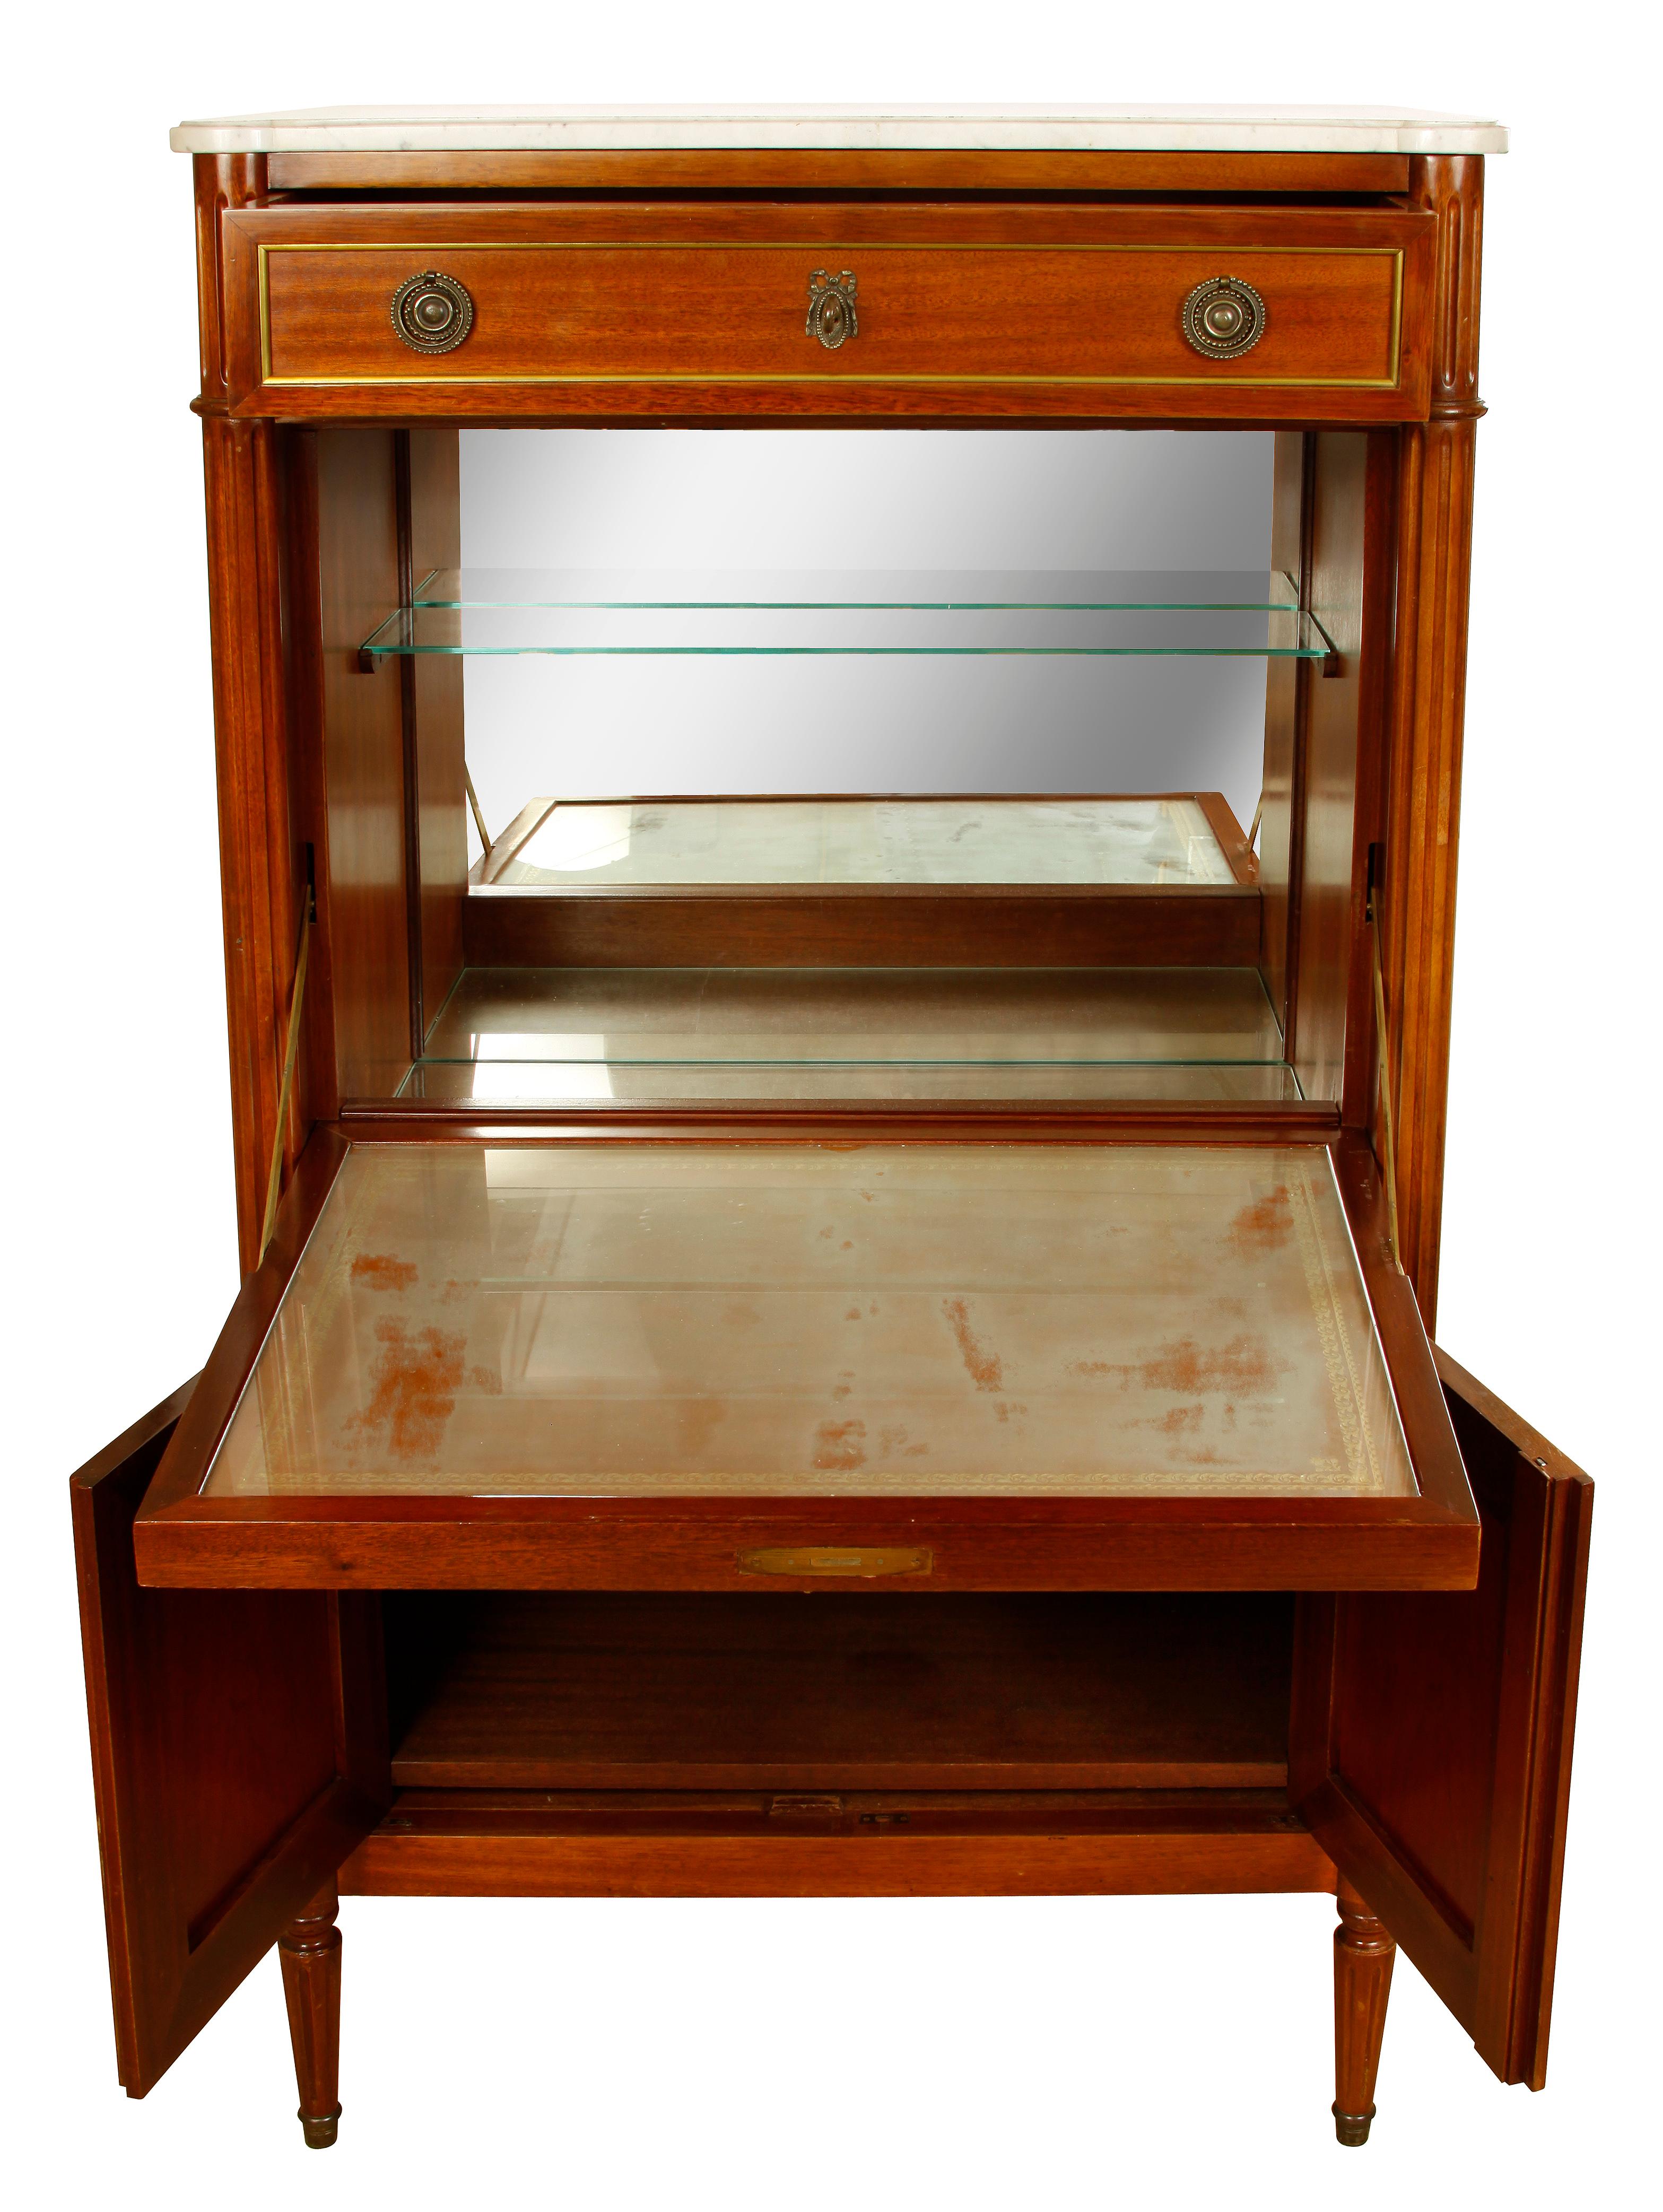 Louis XVI style marble top semanier with brass fittings. One drawer at top, door on hinges opens to mirrored back and one shelf, and two doors open at bottom.